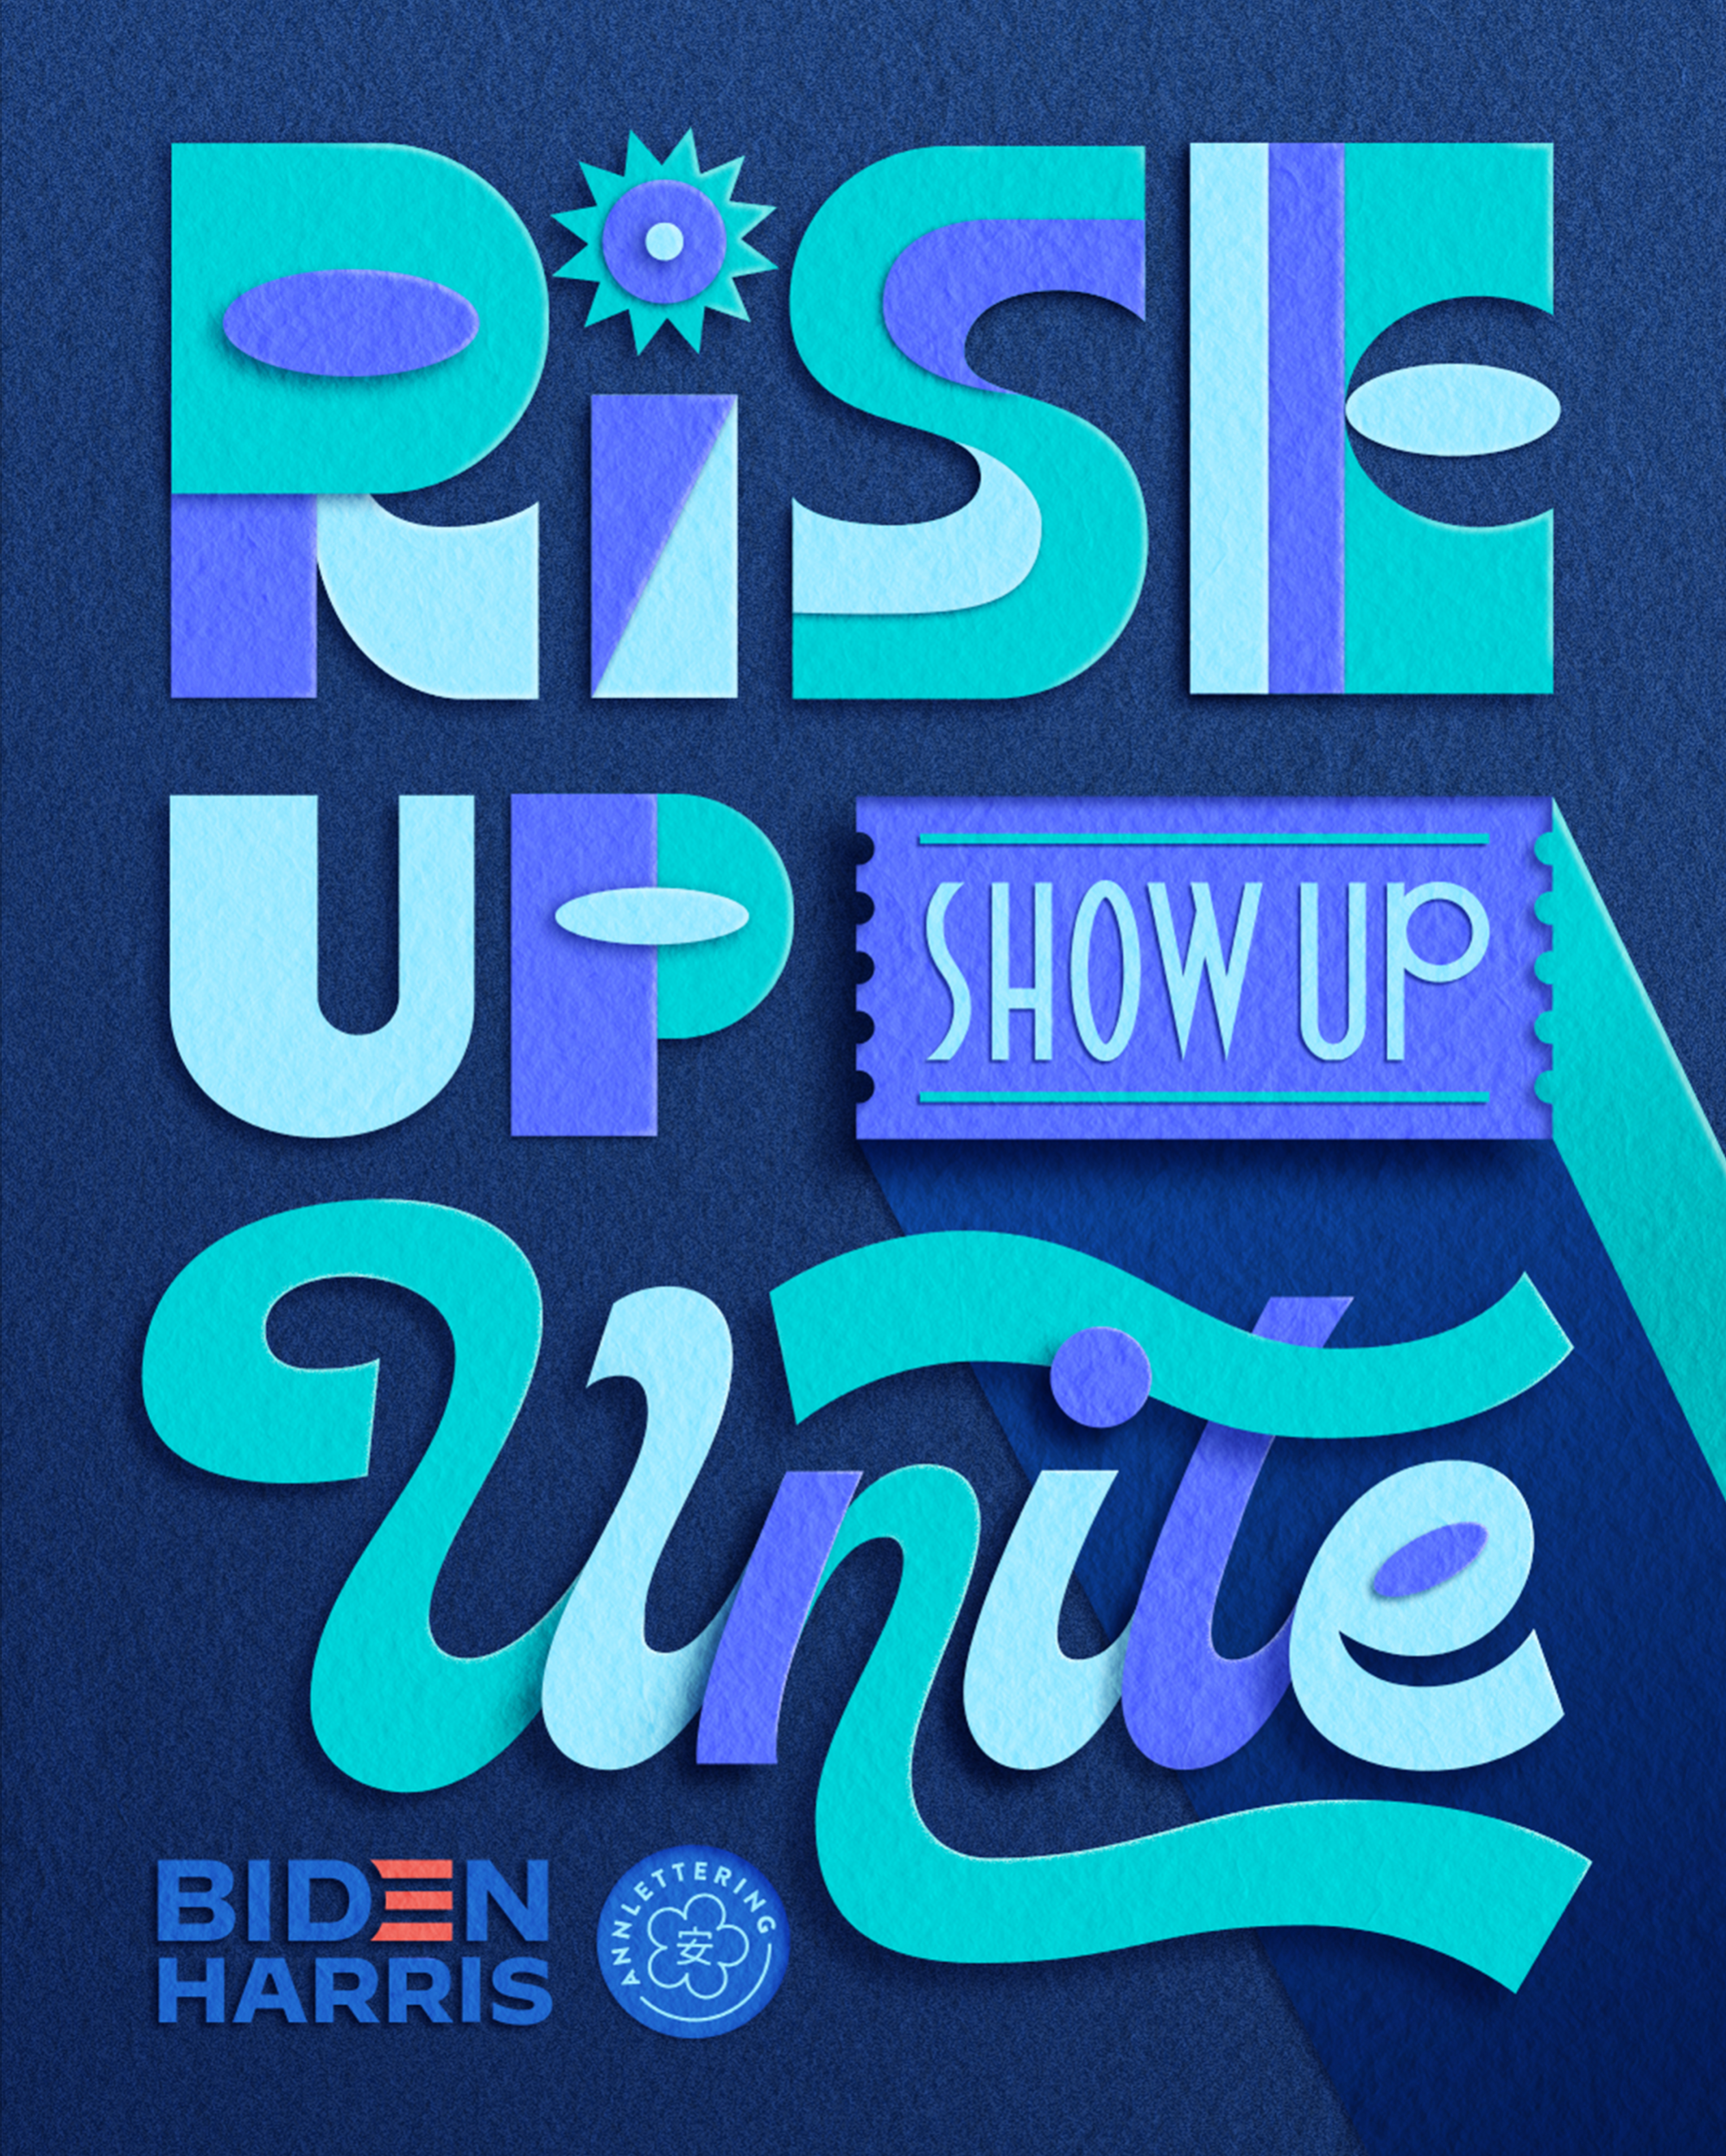 Lettering art of the phrase 'Rise up. Show up. Unite!' by Ann Chen